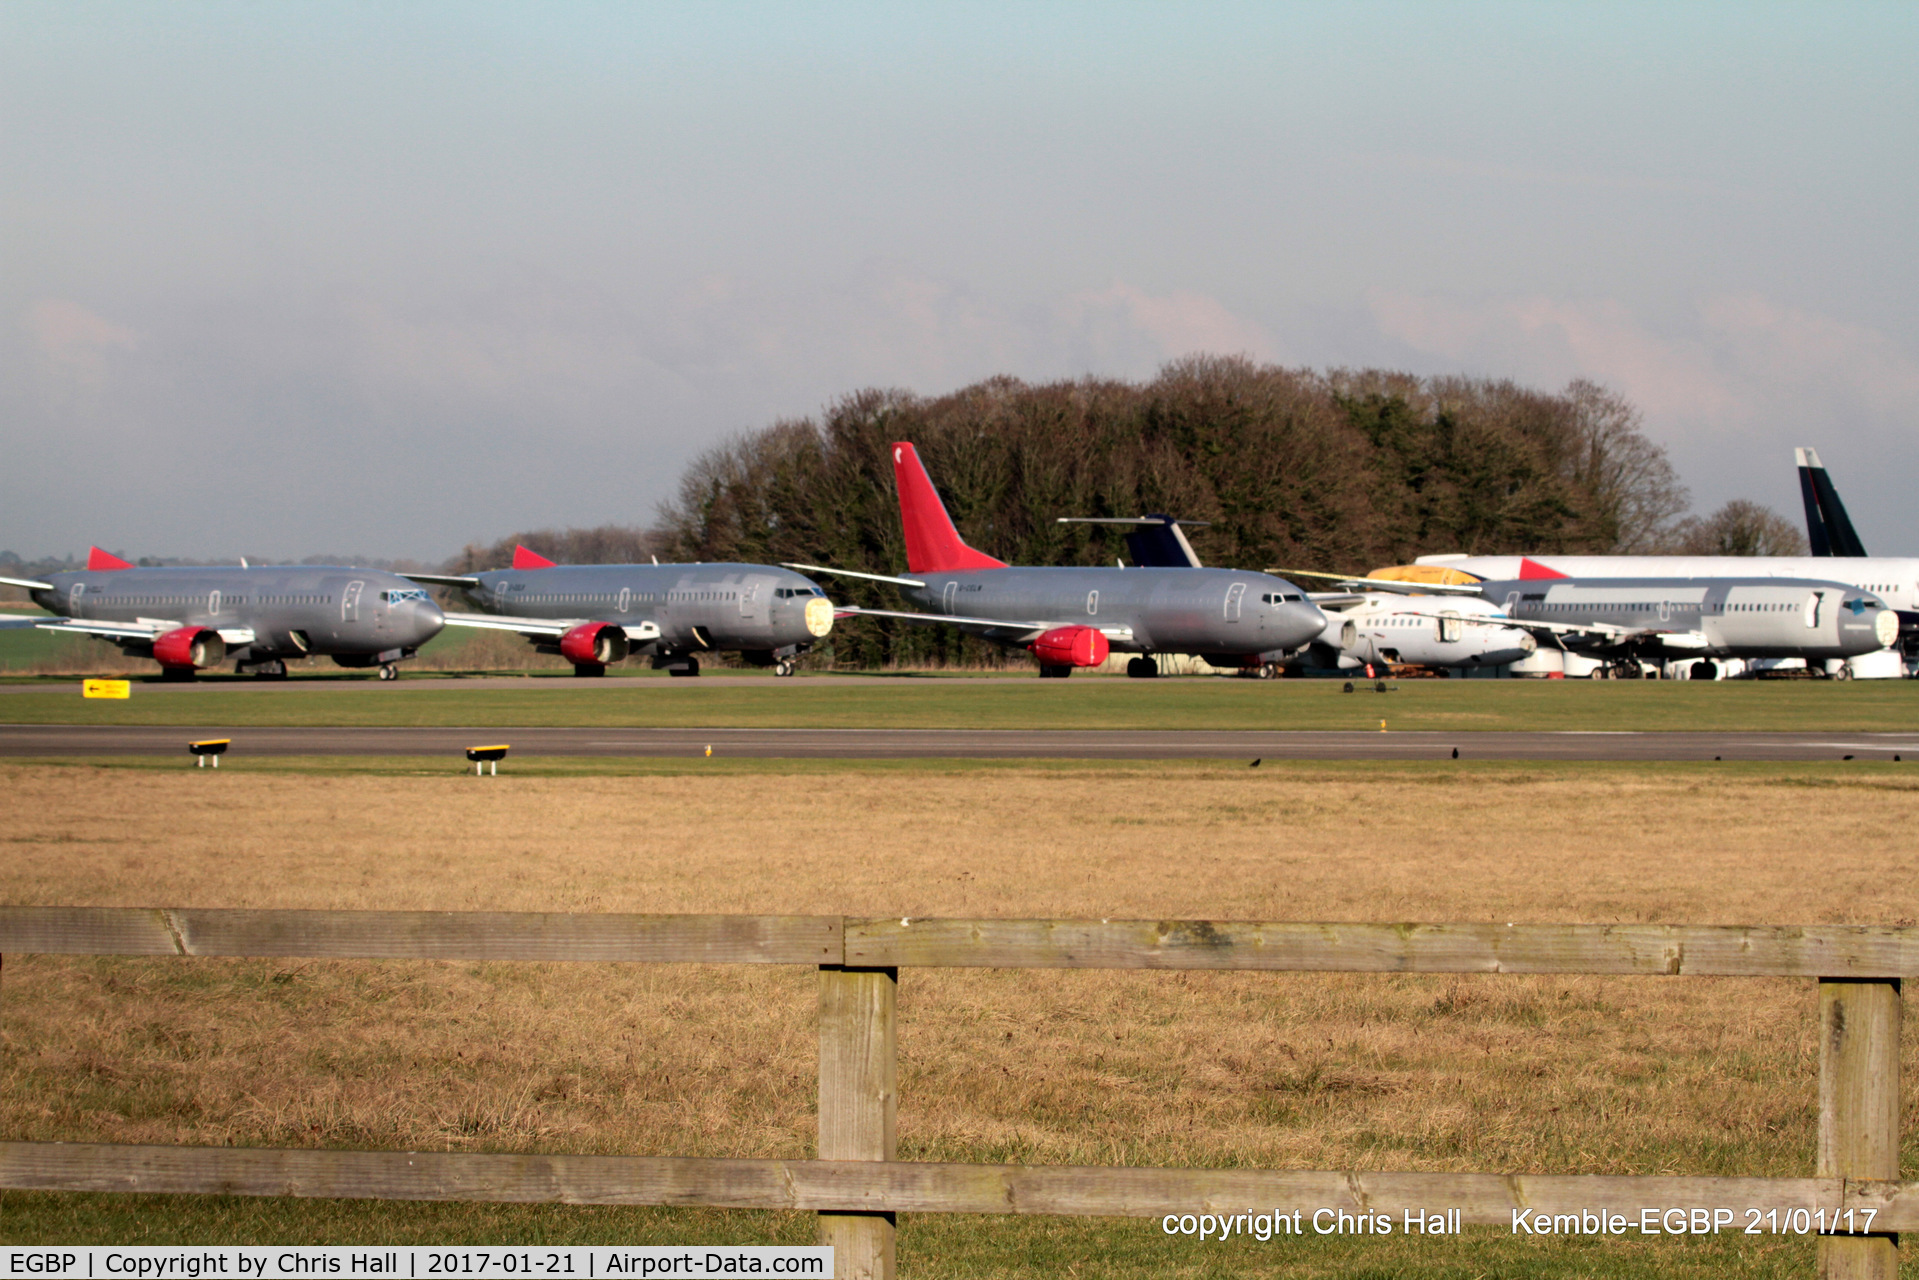 Kemble Airport, Kemble, England United Kingdom (EGBP) - 4 ex Jet2 B737's in the scrapping area at Kemble